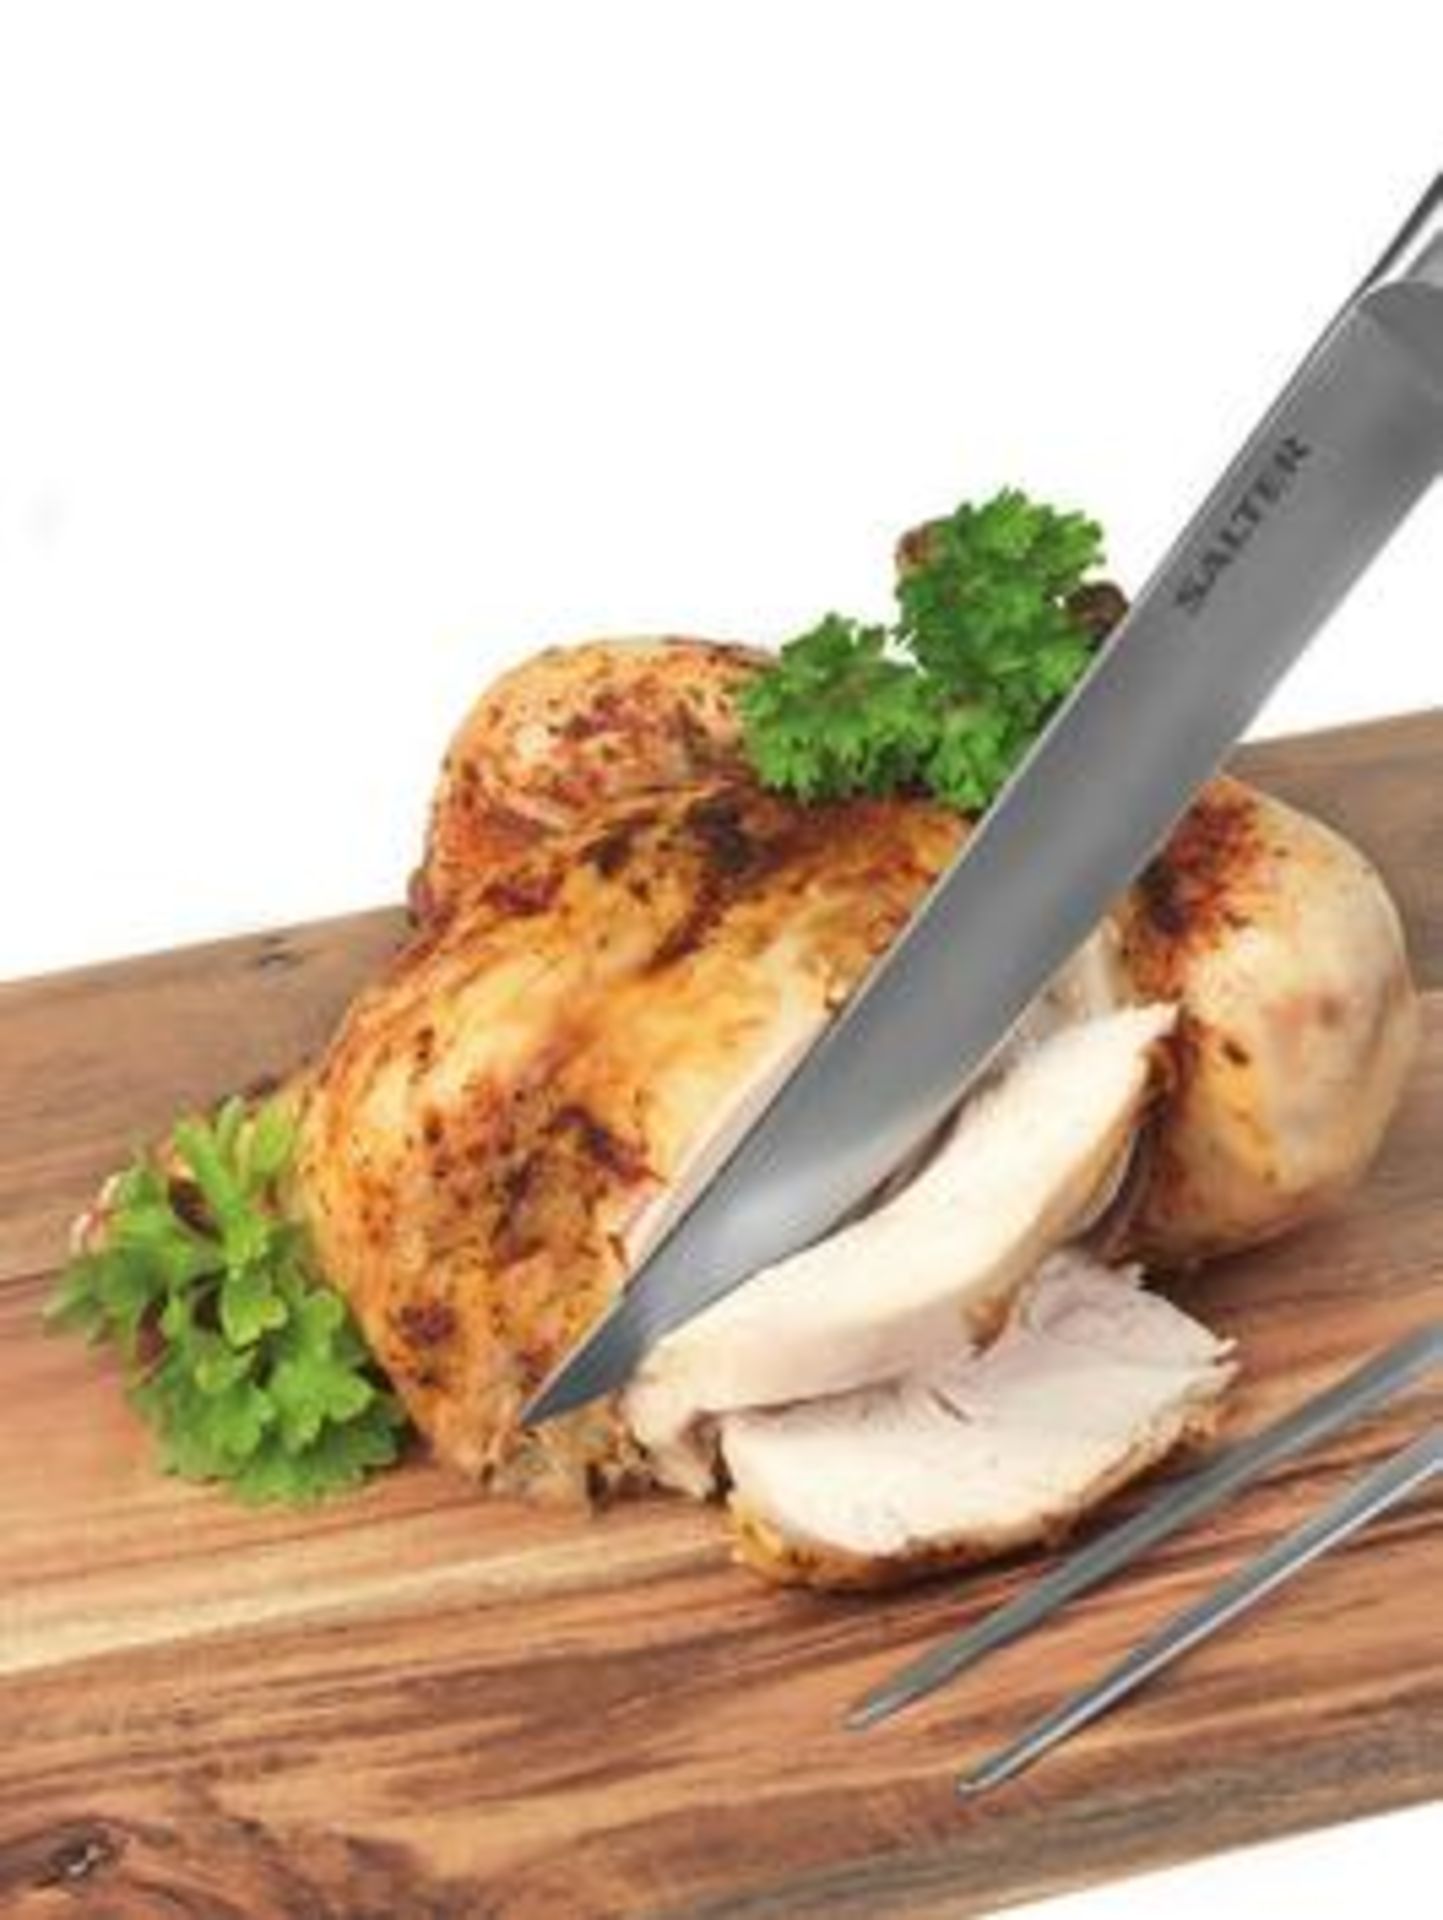 V Brand New Salter Elegance Carving Knife And Fork With Chopping Board ISP £46.99 (Mahahome.com) - Image 3 of 4